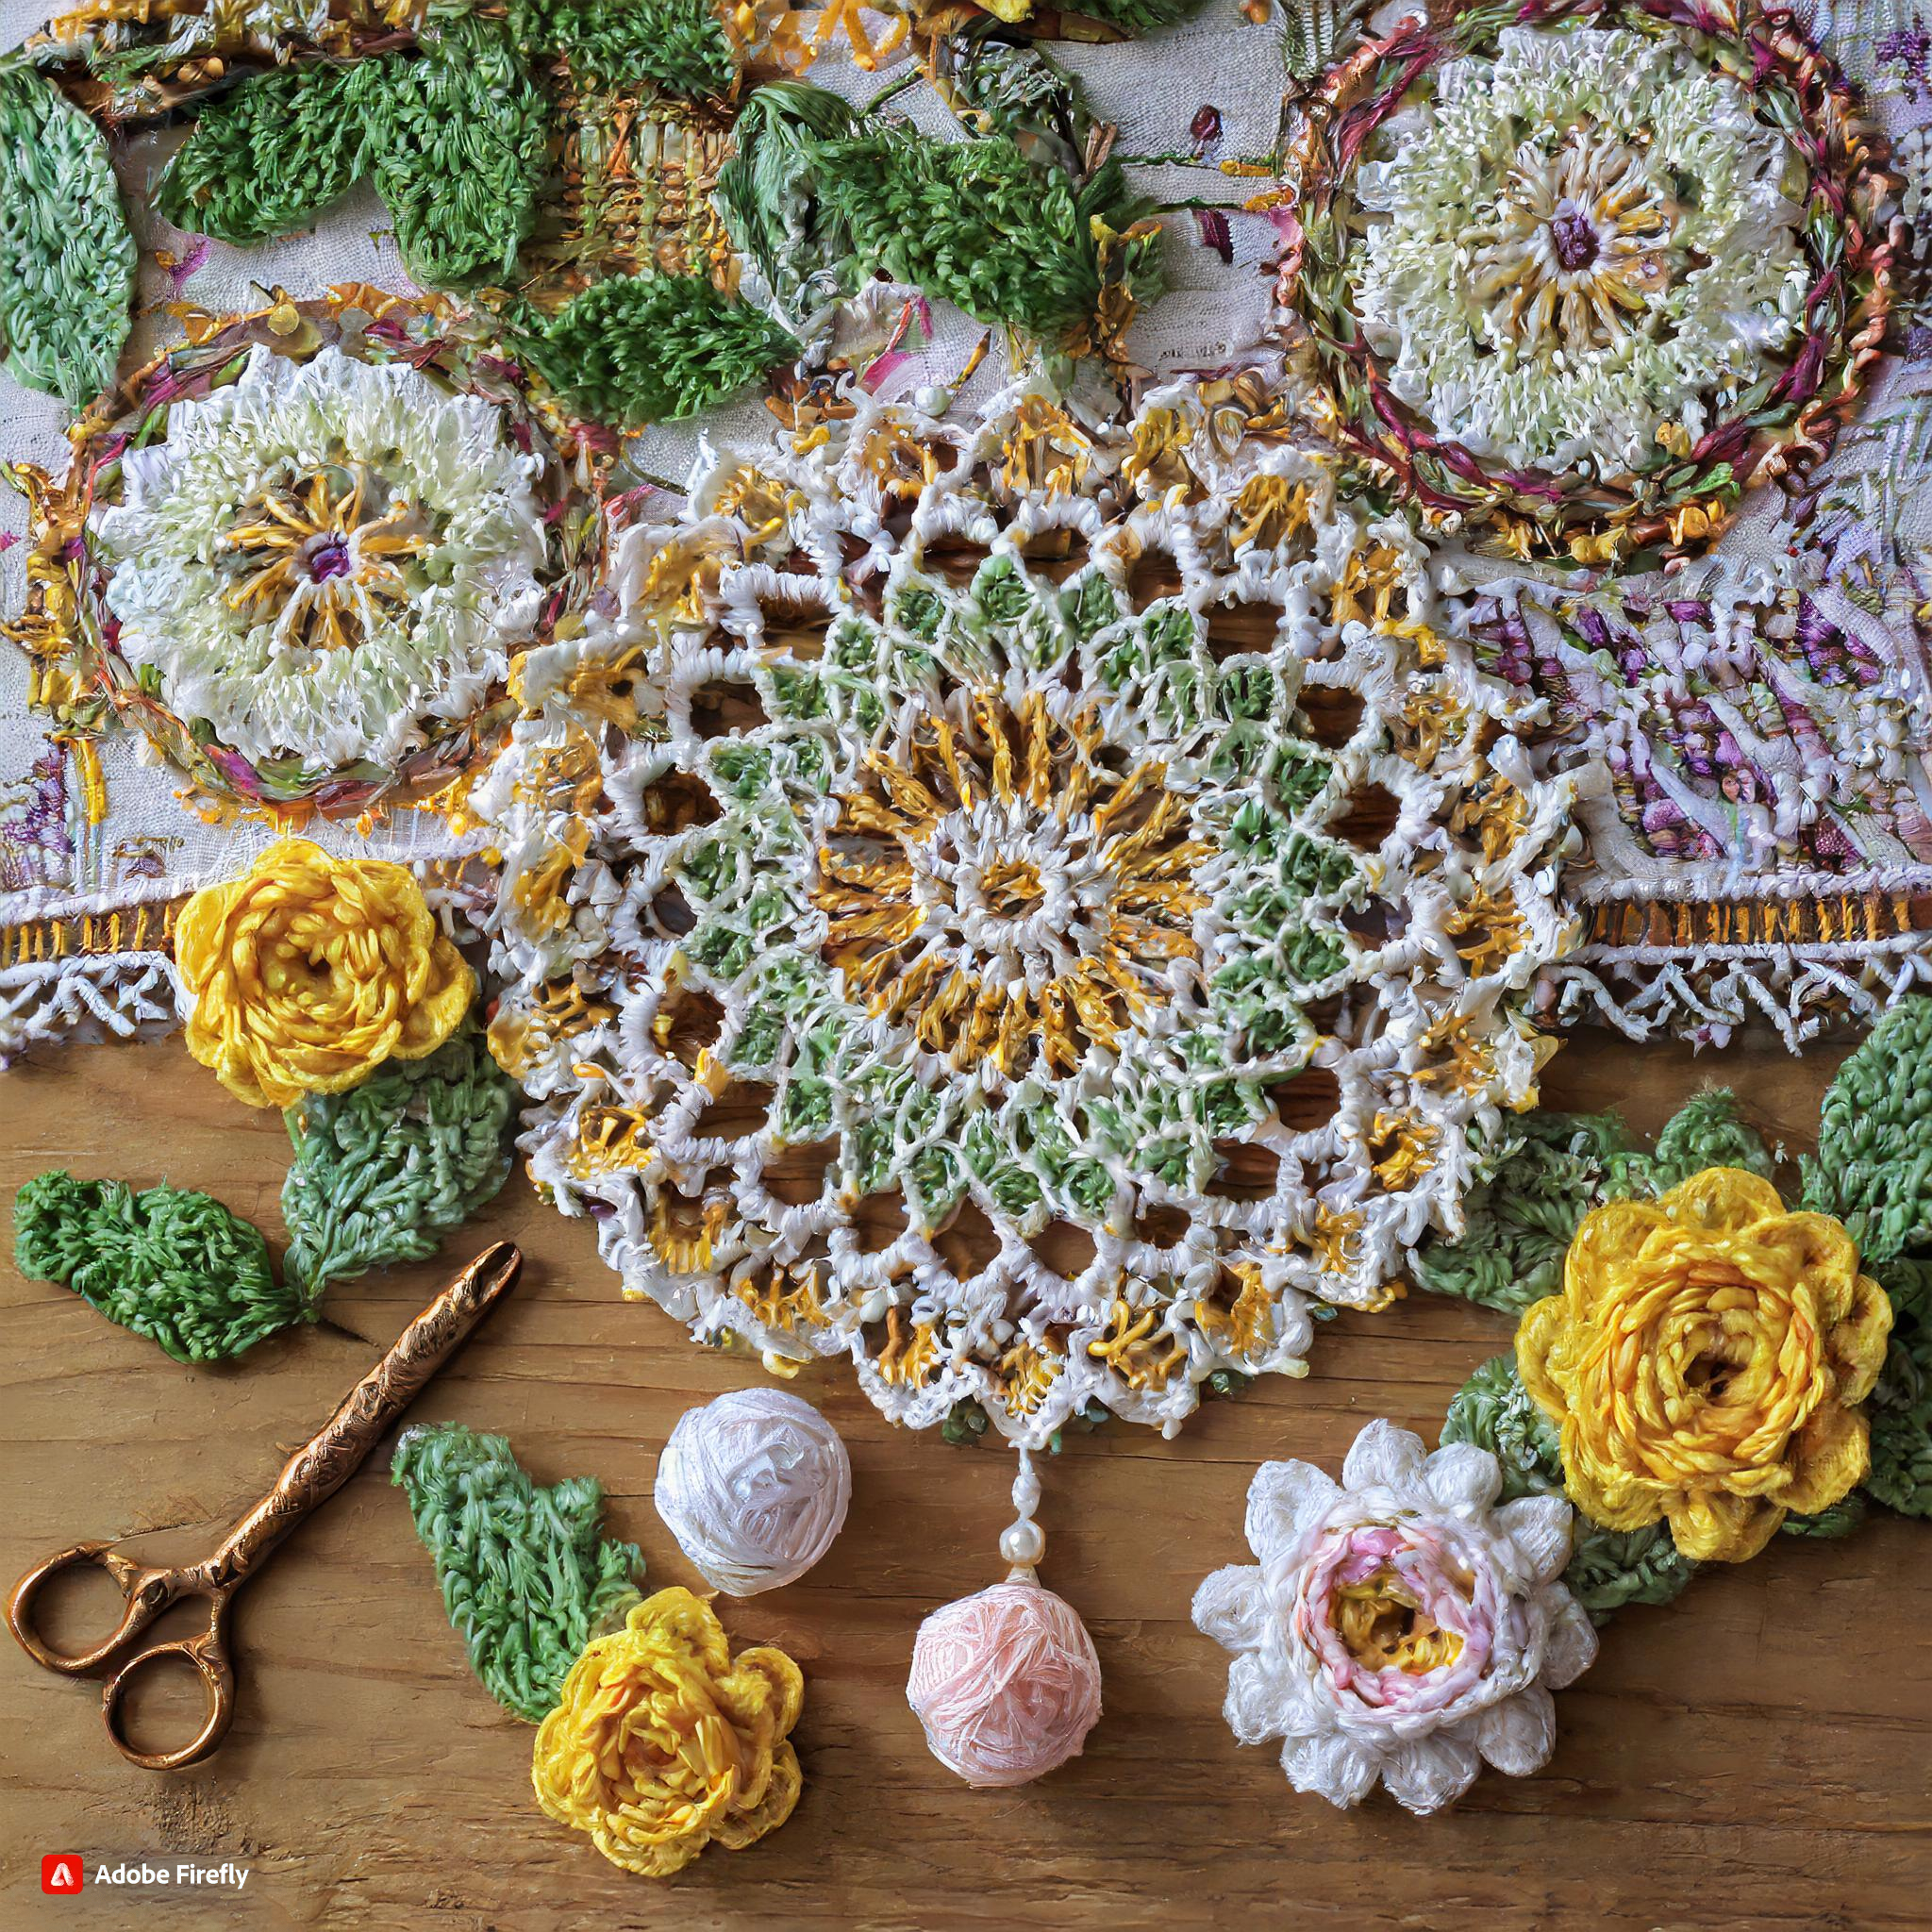 Preview of 3 Creative Ways to Use Cross Stitch Patterns in Crocheting